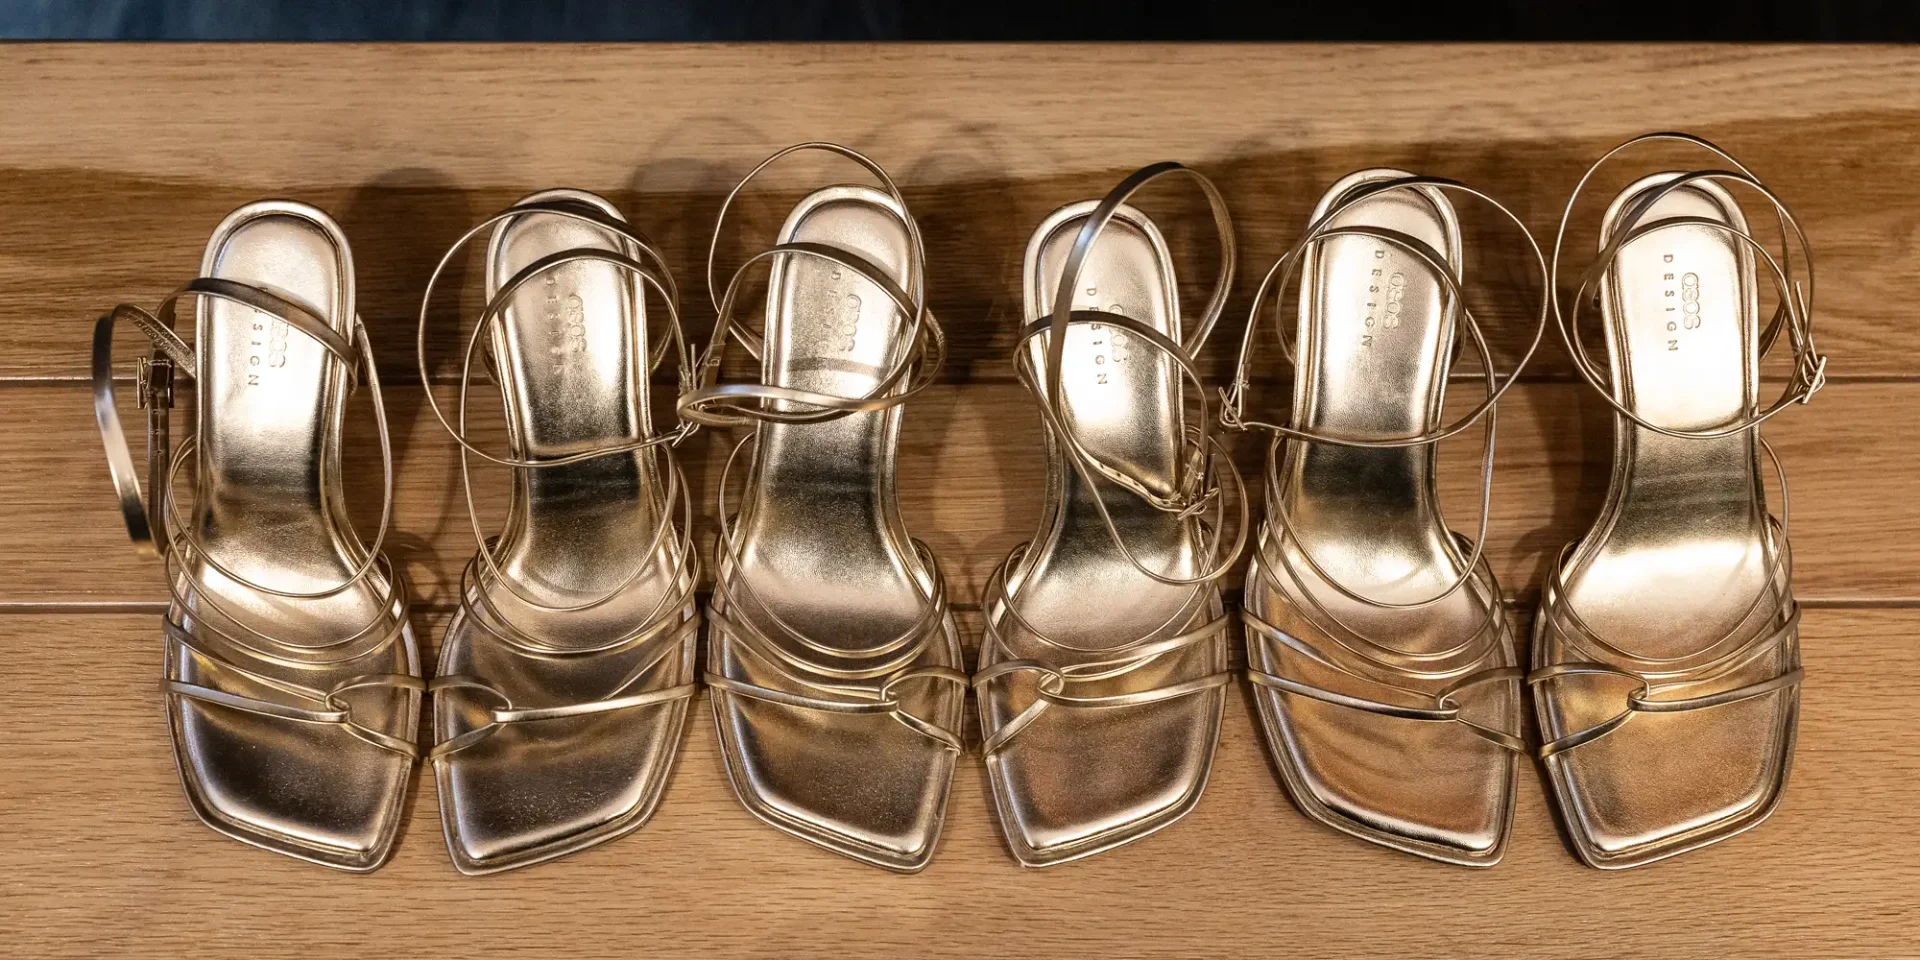 Three pairs of metallic gold high-heeled sandals with straps, displayed in a row on a wooden shelf.